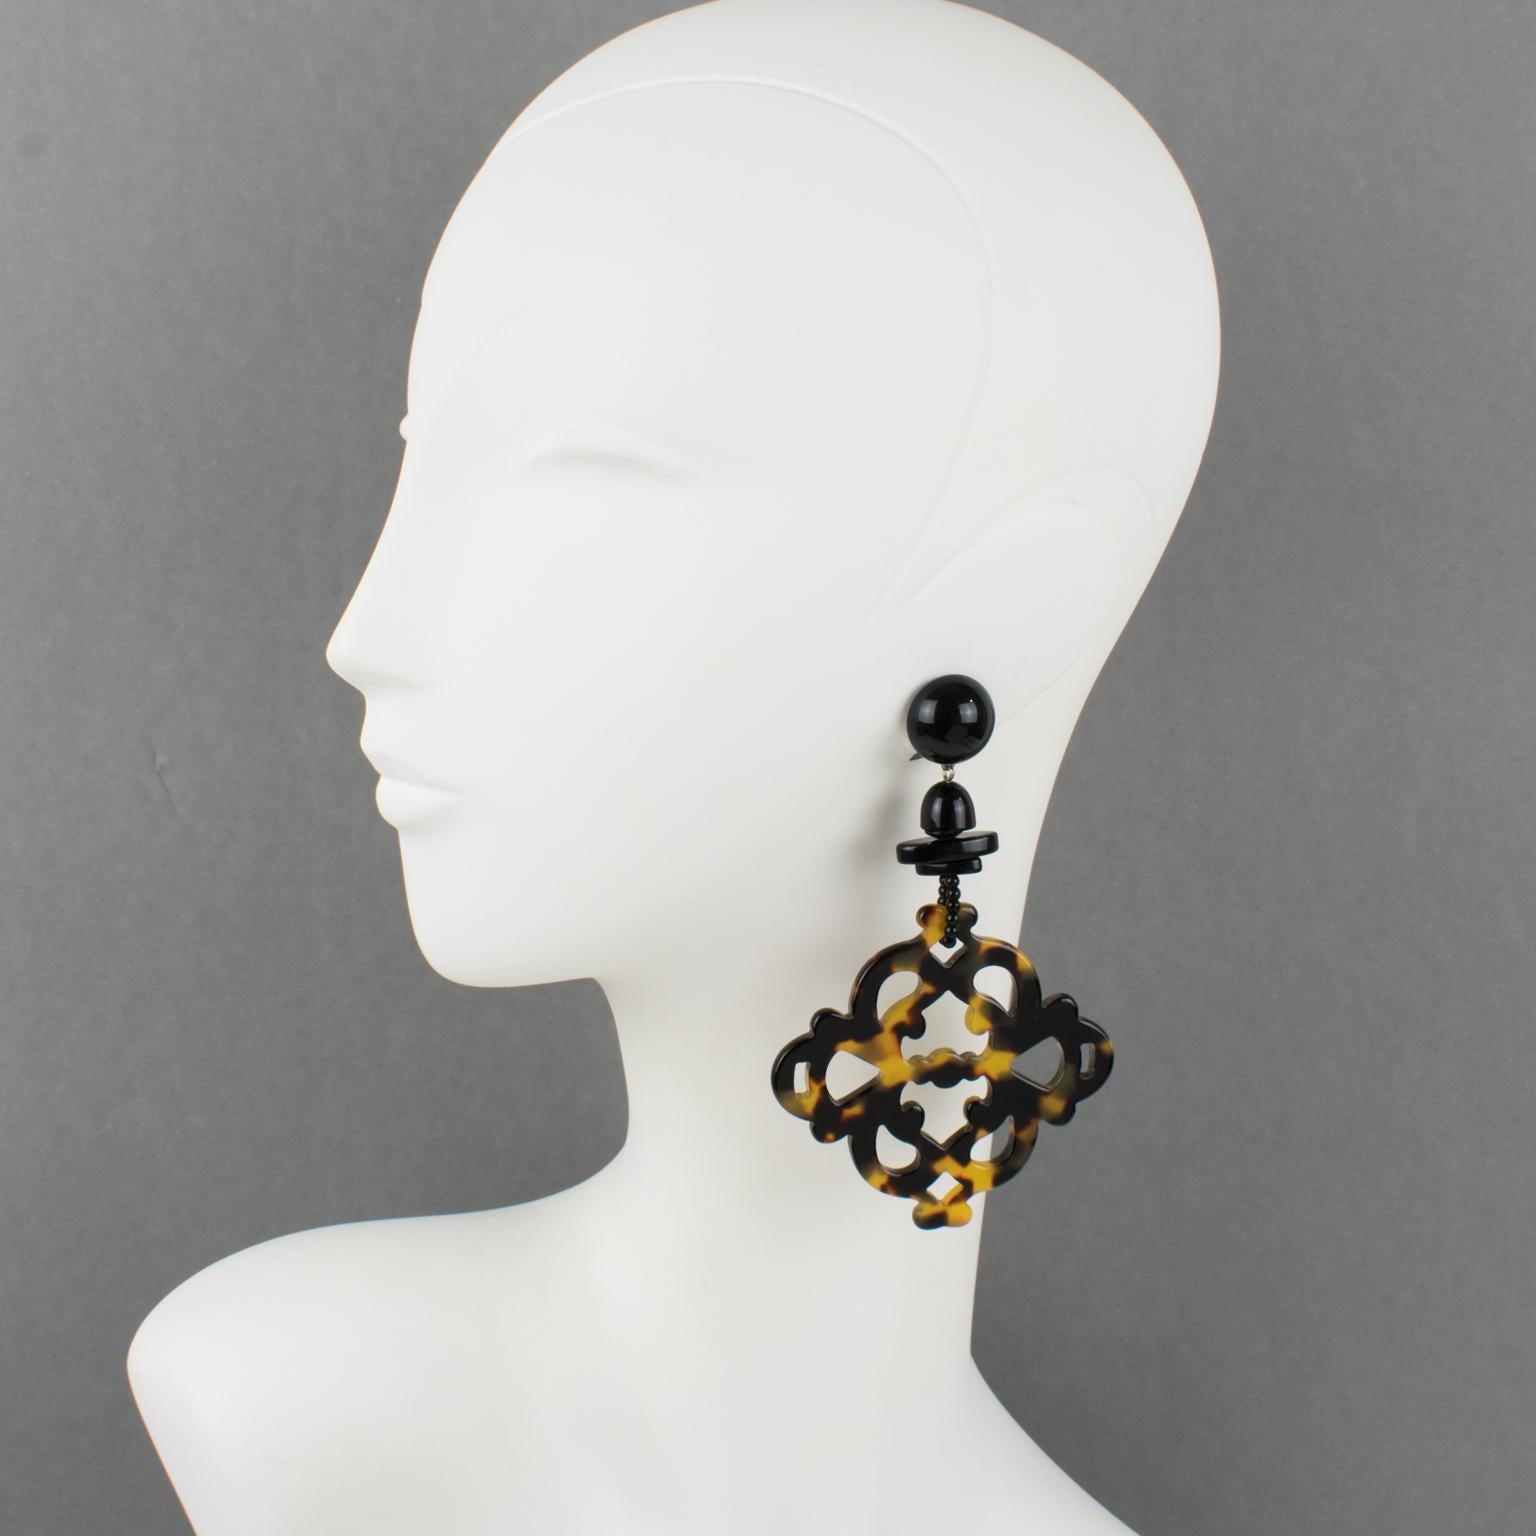 These sophisticated Angela Caputi, made in Italy resin clip-on earrings feature a chandelier dangling shape with black resin geometric links contrasted with carved and see-thru large elements in a textured tortoiseshell pattern. Her matching of